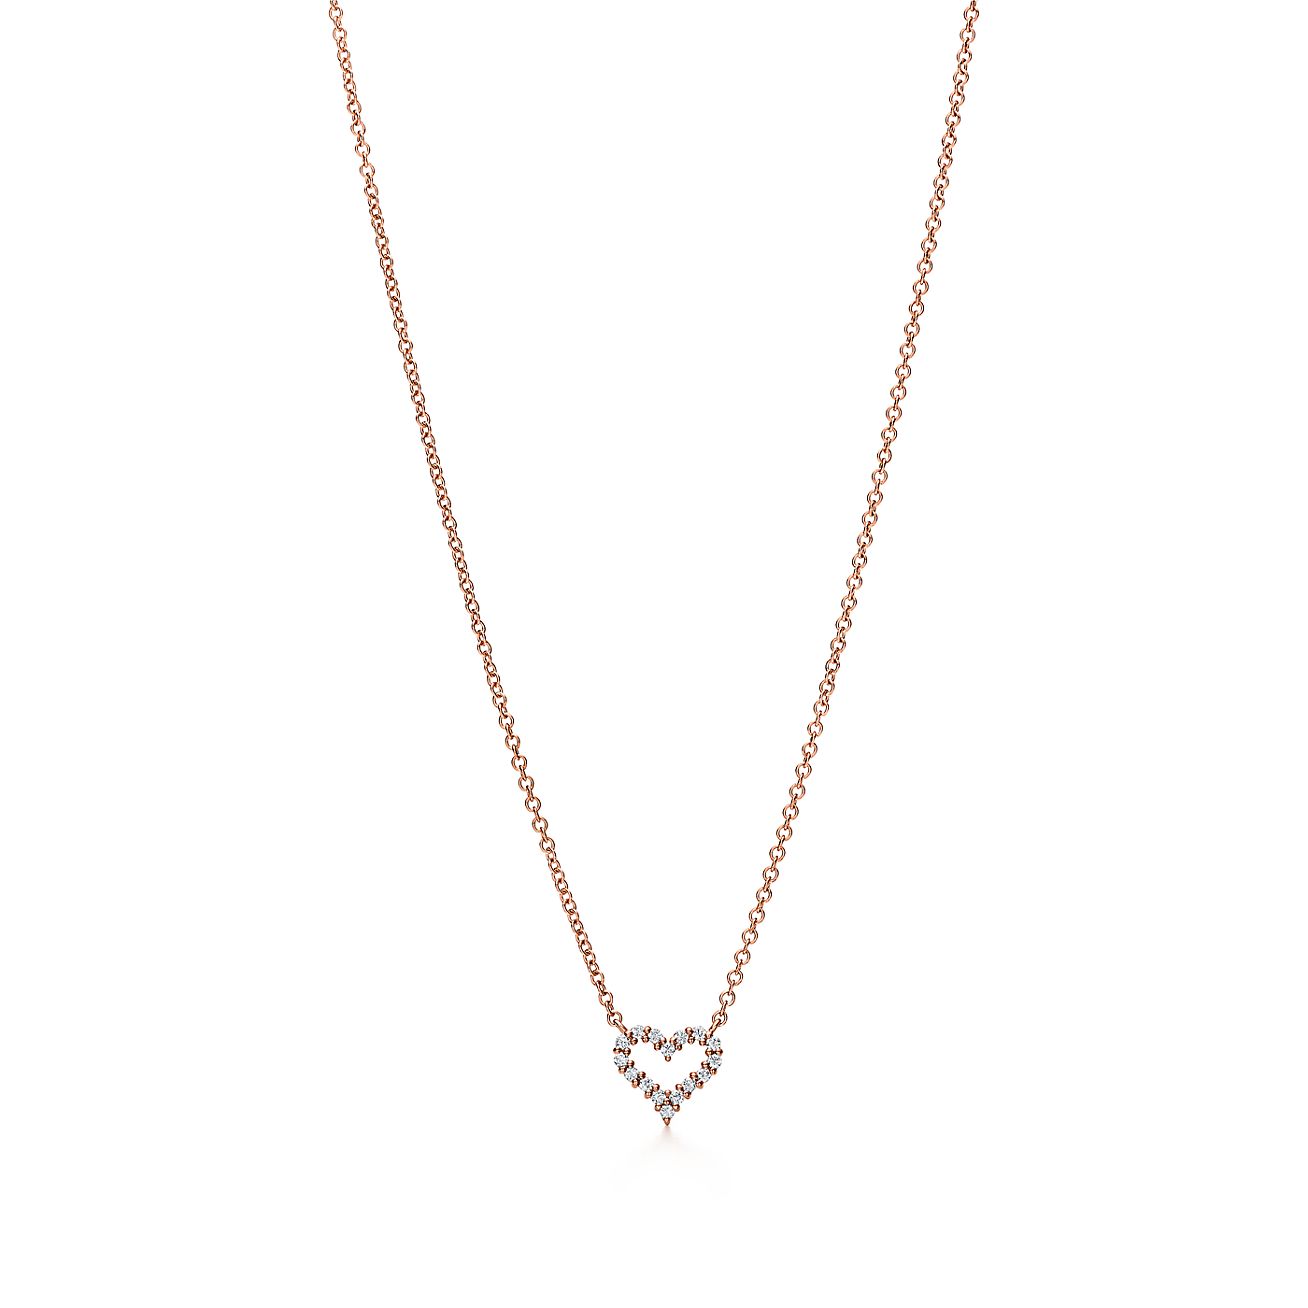 Heart pendant in 18k rose gold with 